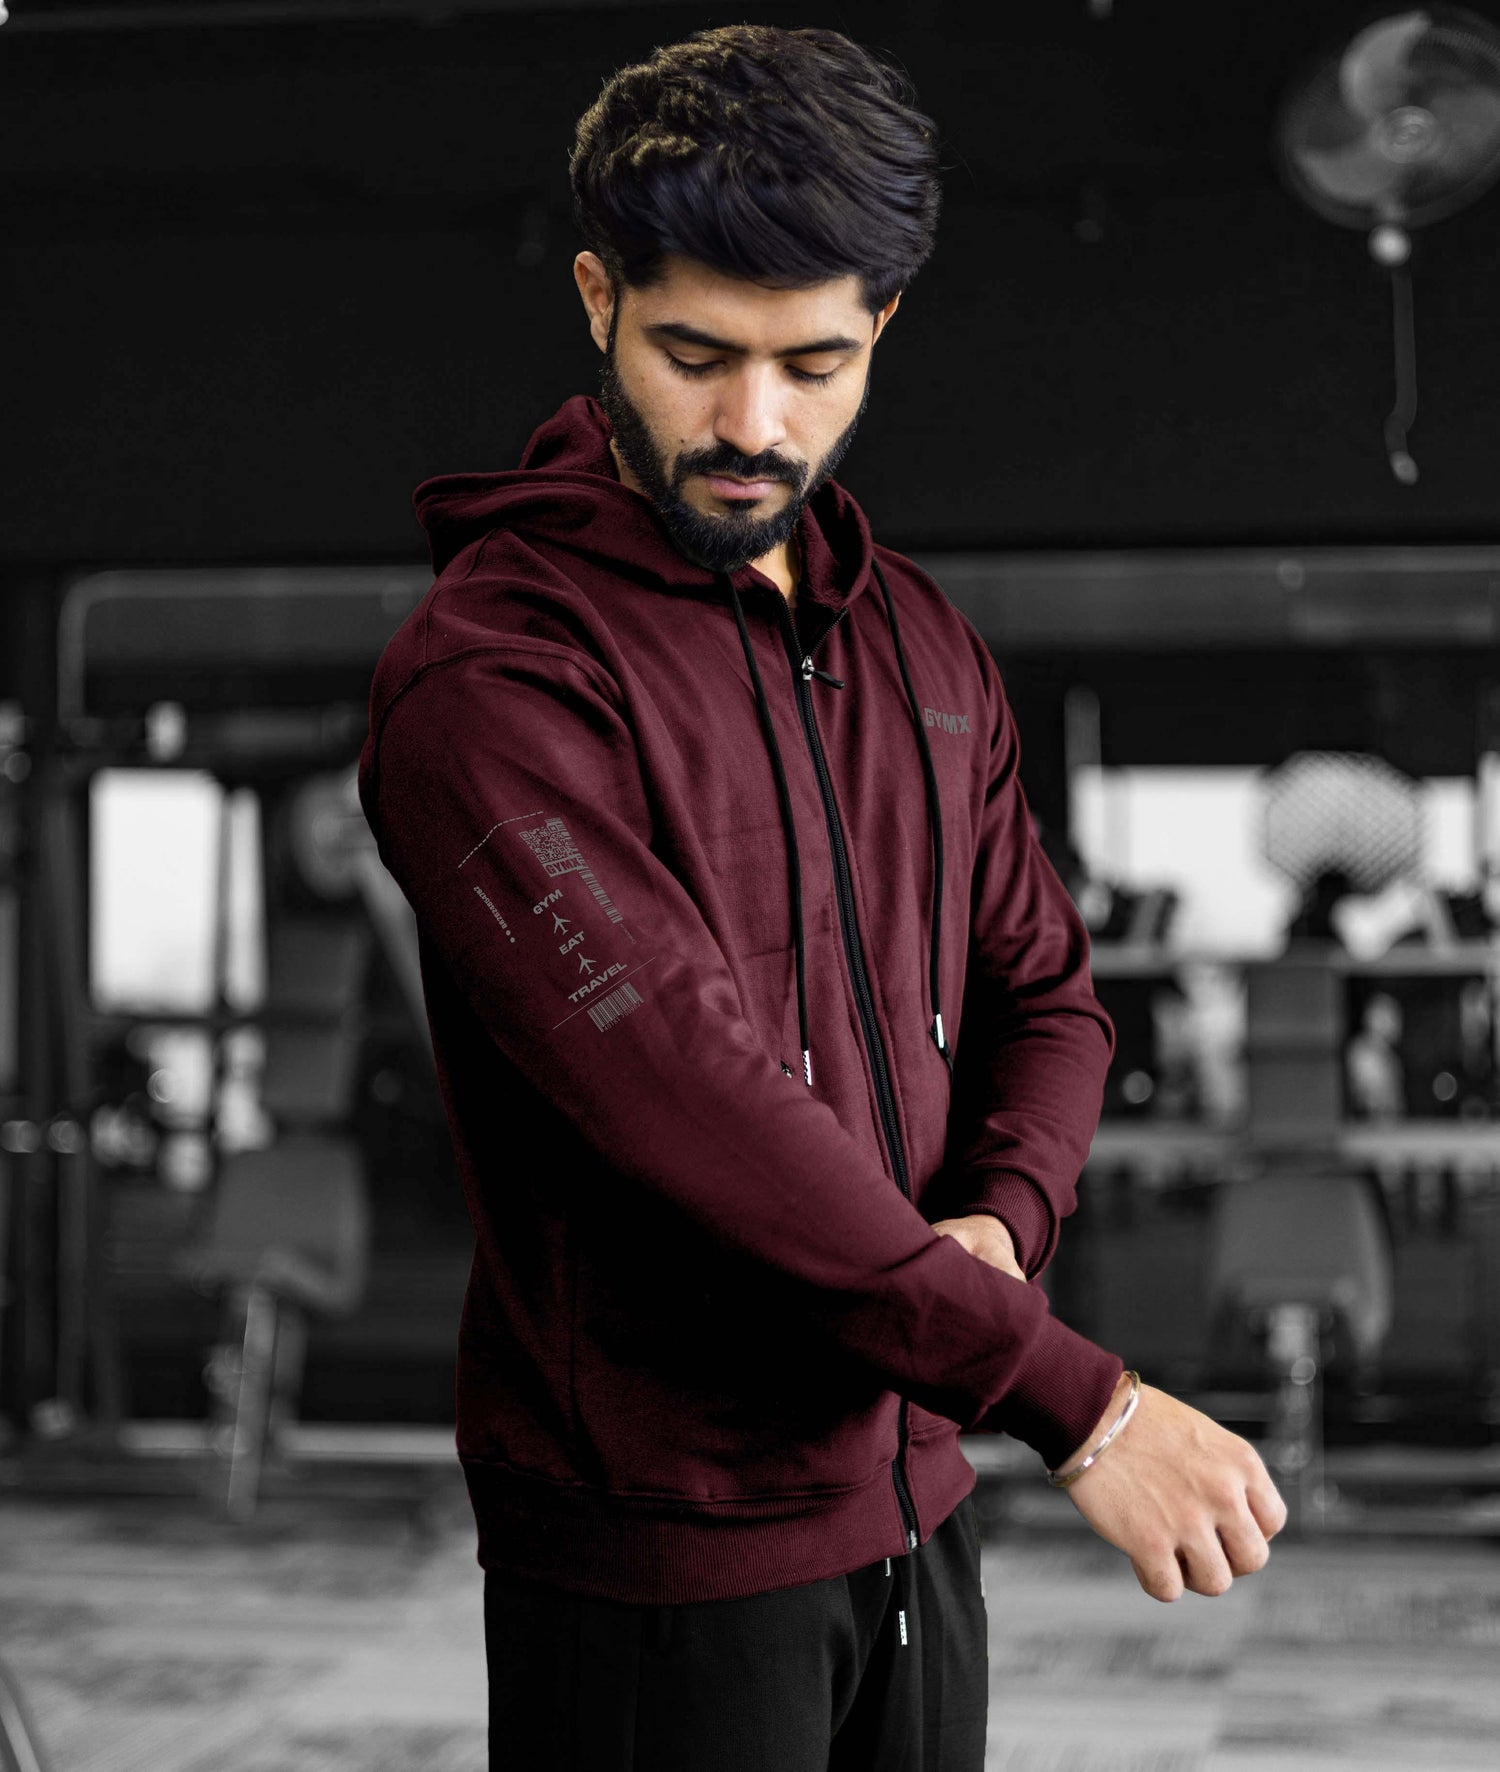 Signature Oversized GymX Hoodie: Sublime Maroon - GymX